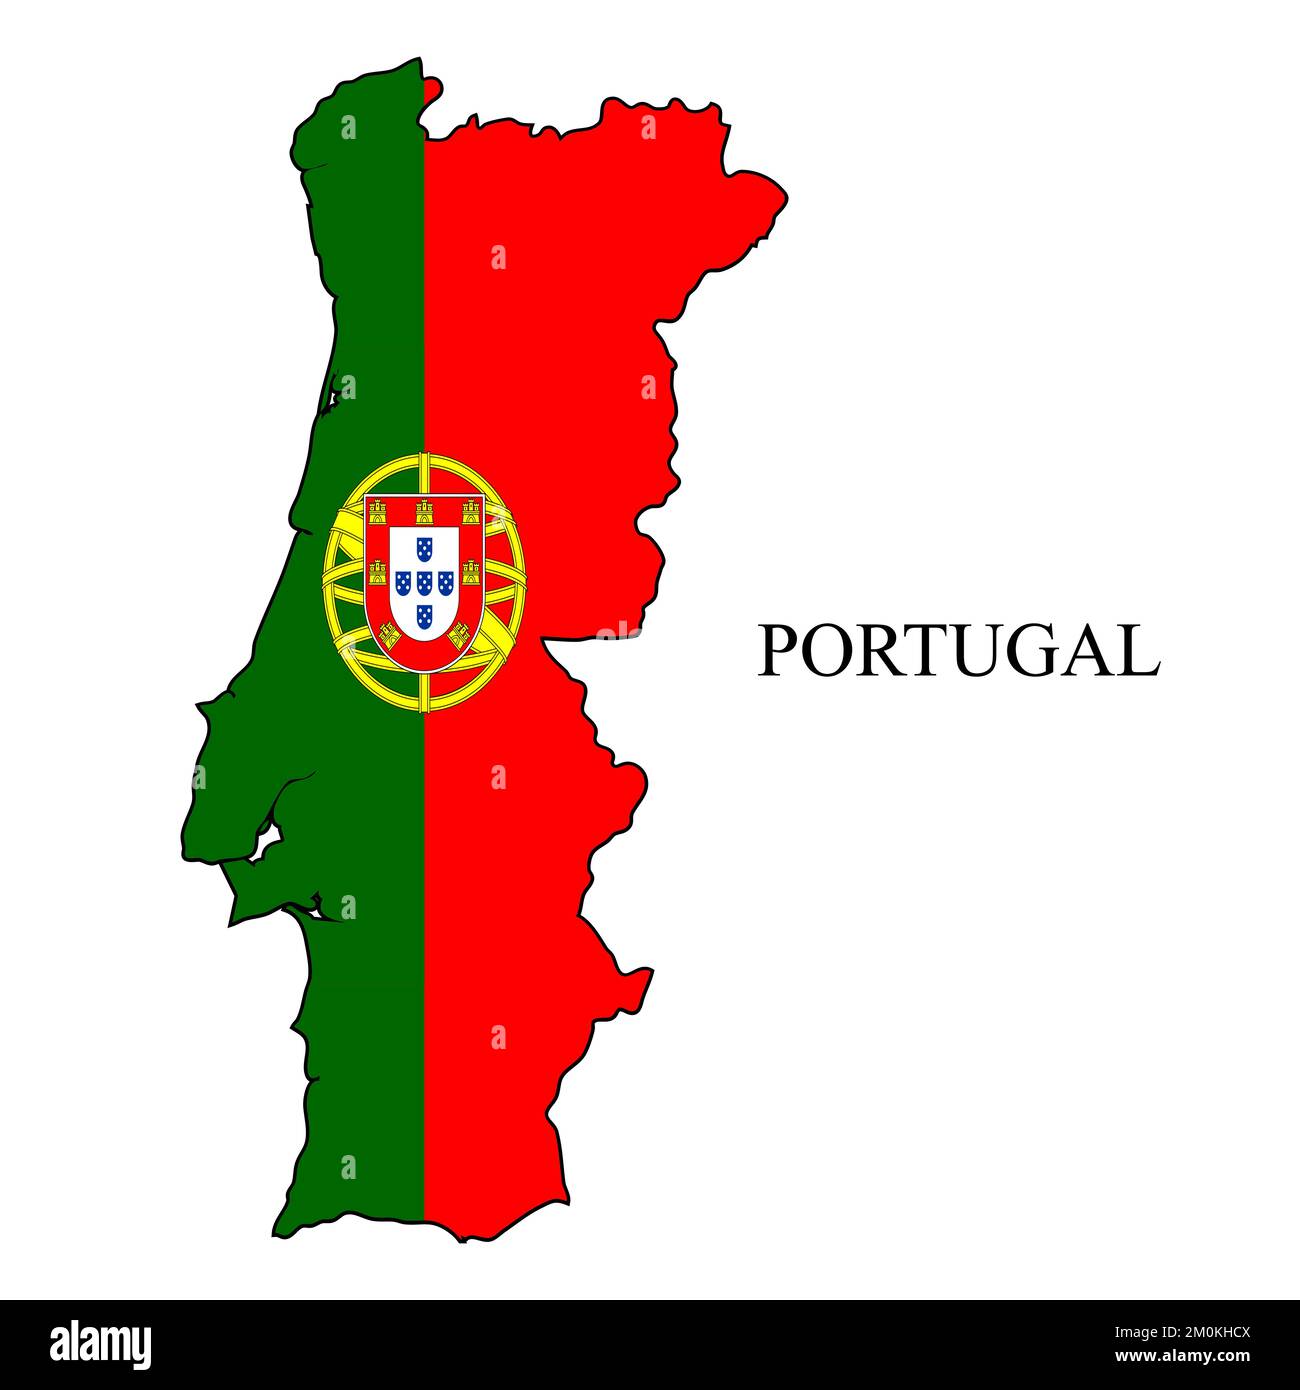 Portugal Marked By Blue In Grey Political Map Of Europe. Vector  Illustration. Stock Photo, Picture and Royalty Free Image. Image 90281757.